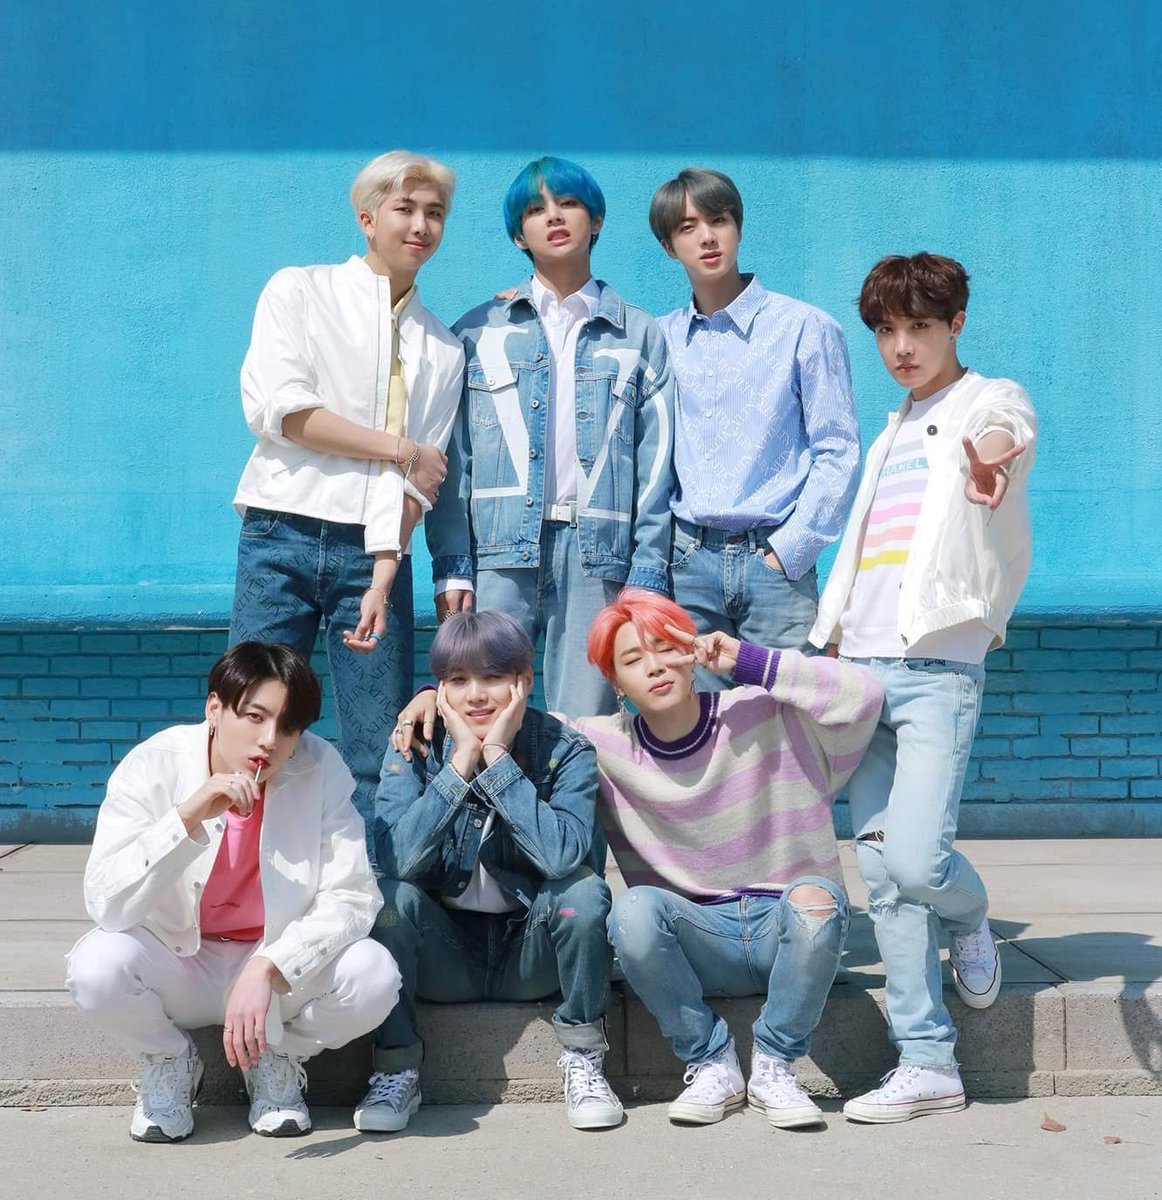 .@BTS_twt's 'Dynamite' is now the song with the second most digital points of all-time by a group on Circle (2.077B), surpassing 'Boy With Luv' 🇰🇷 #1 is 'Spring Day' with 2.396B!